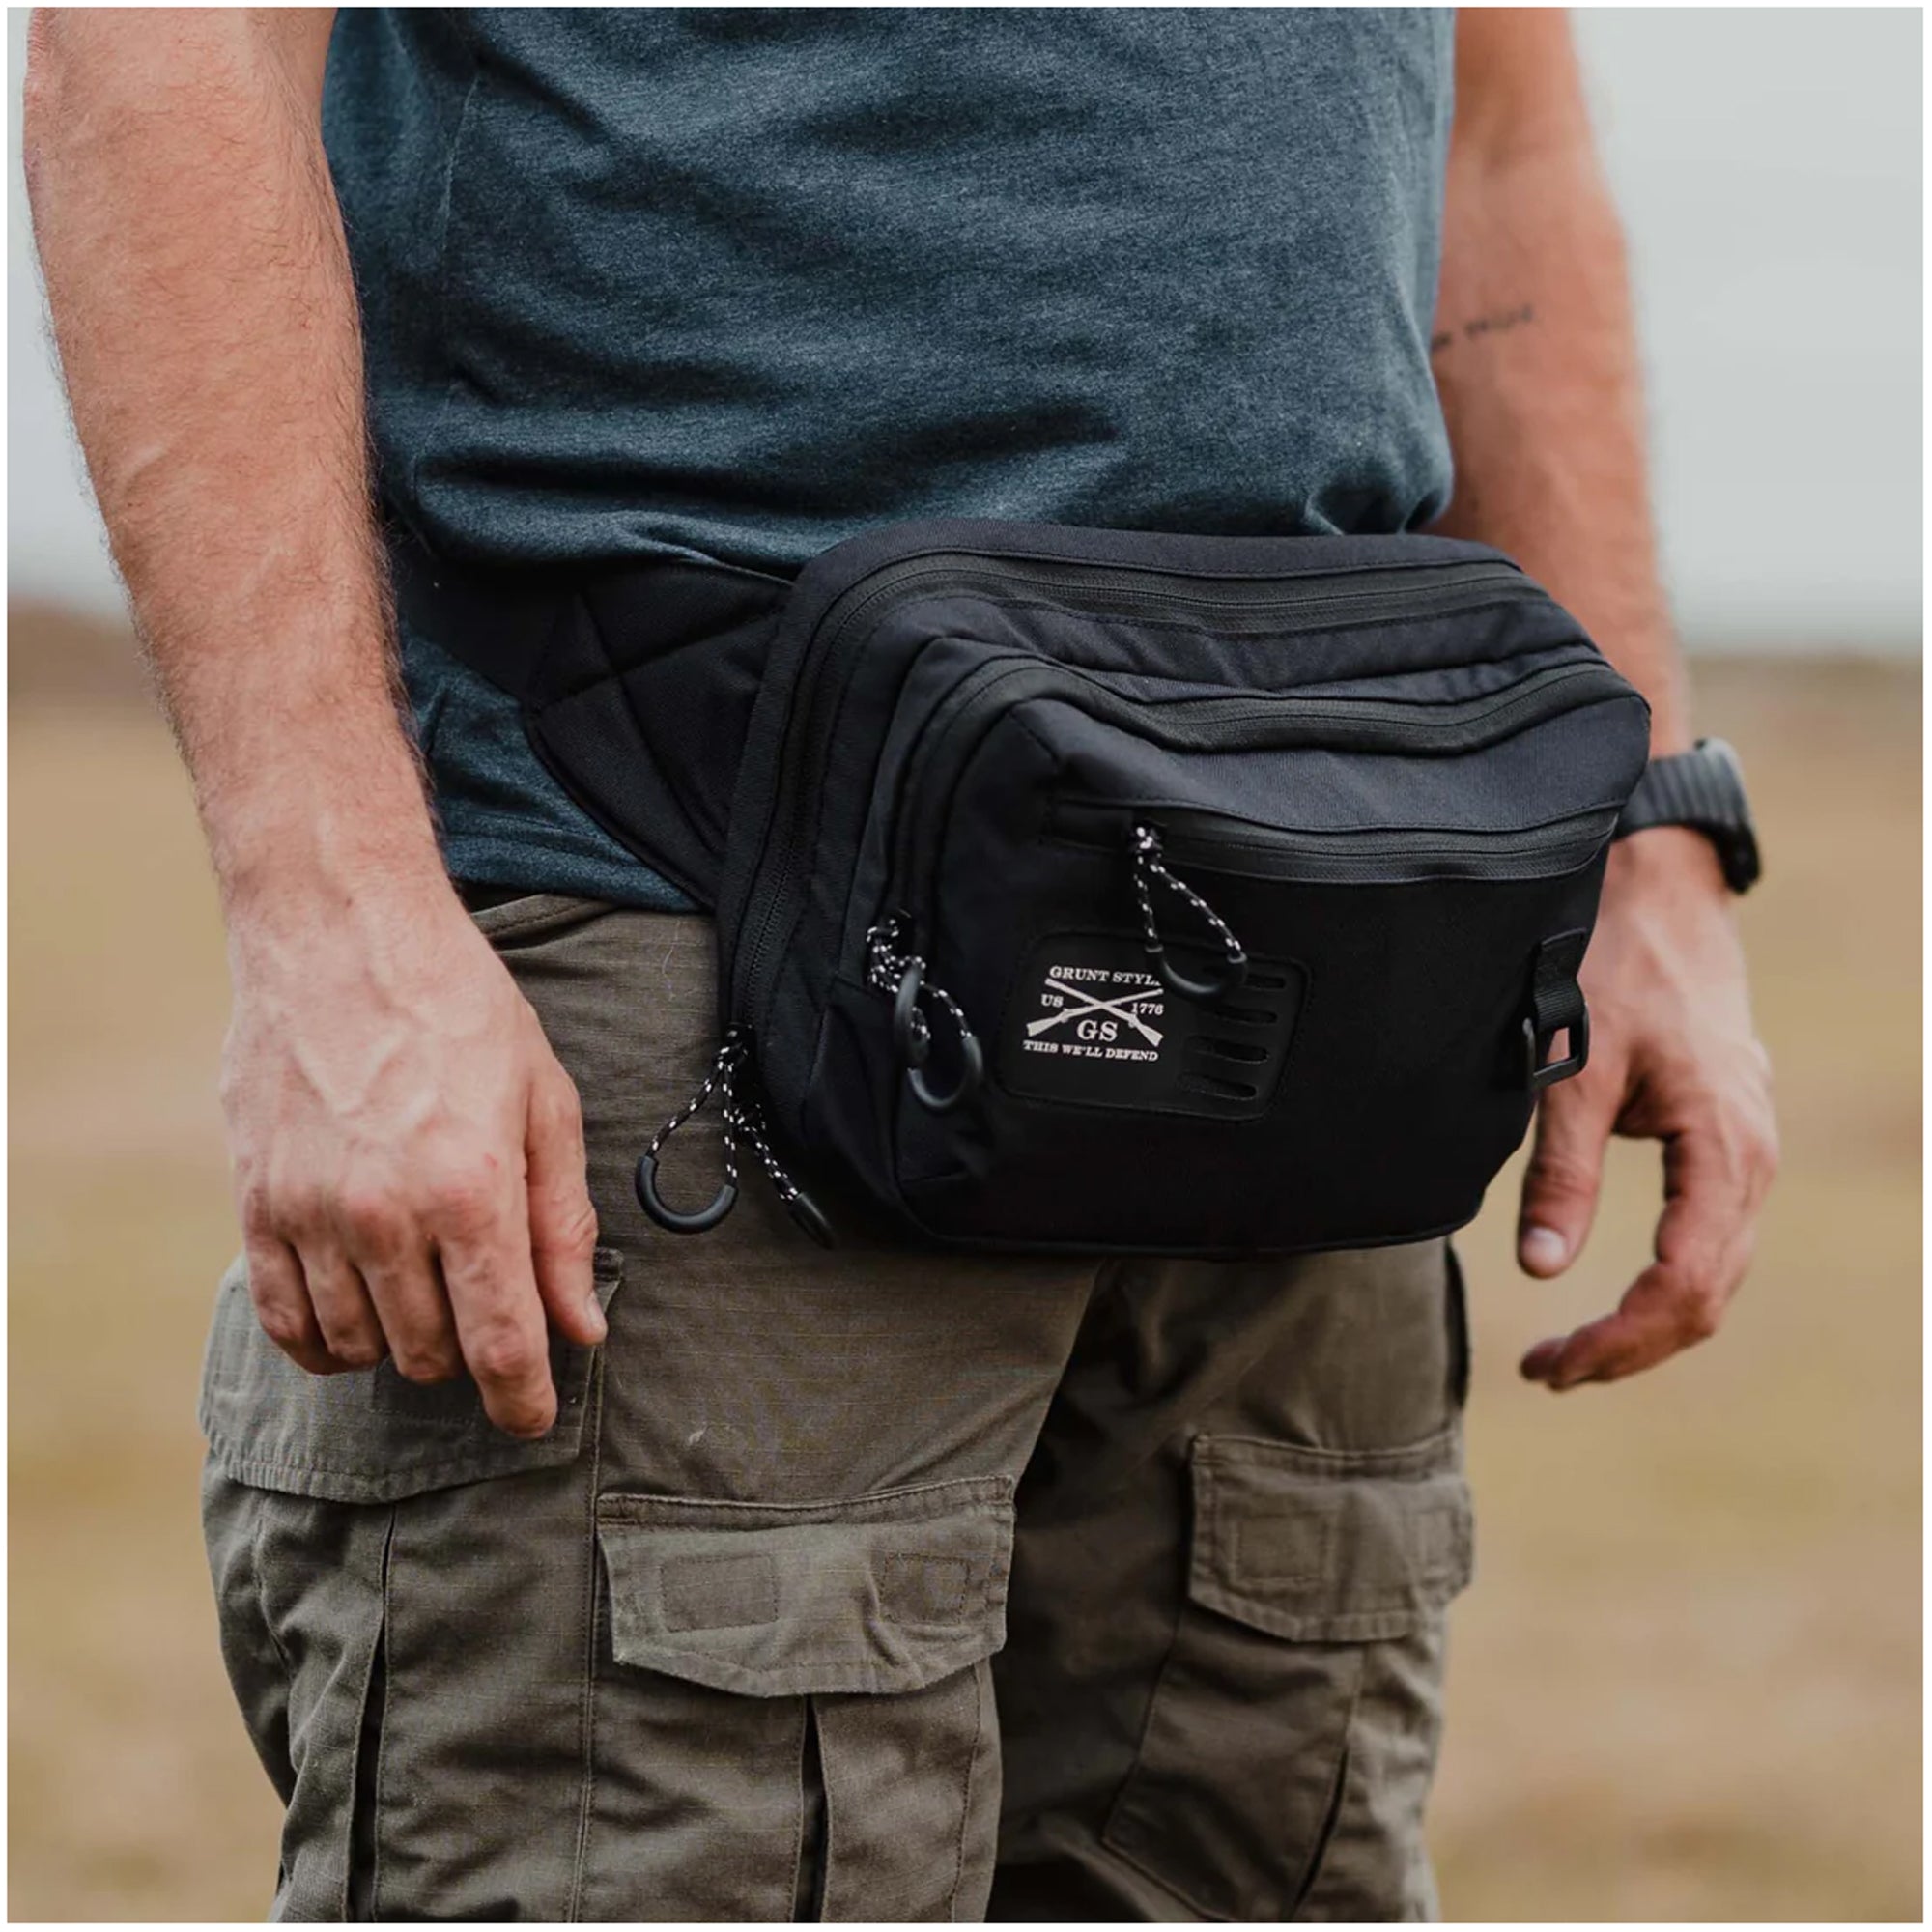 Grunt Style Everyday Carry Fanny Pack - Black Grunt Style